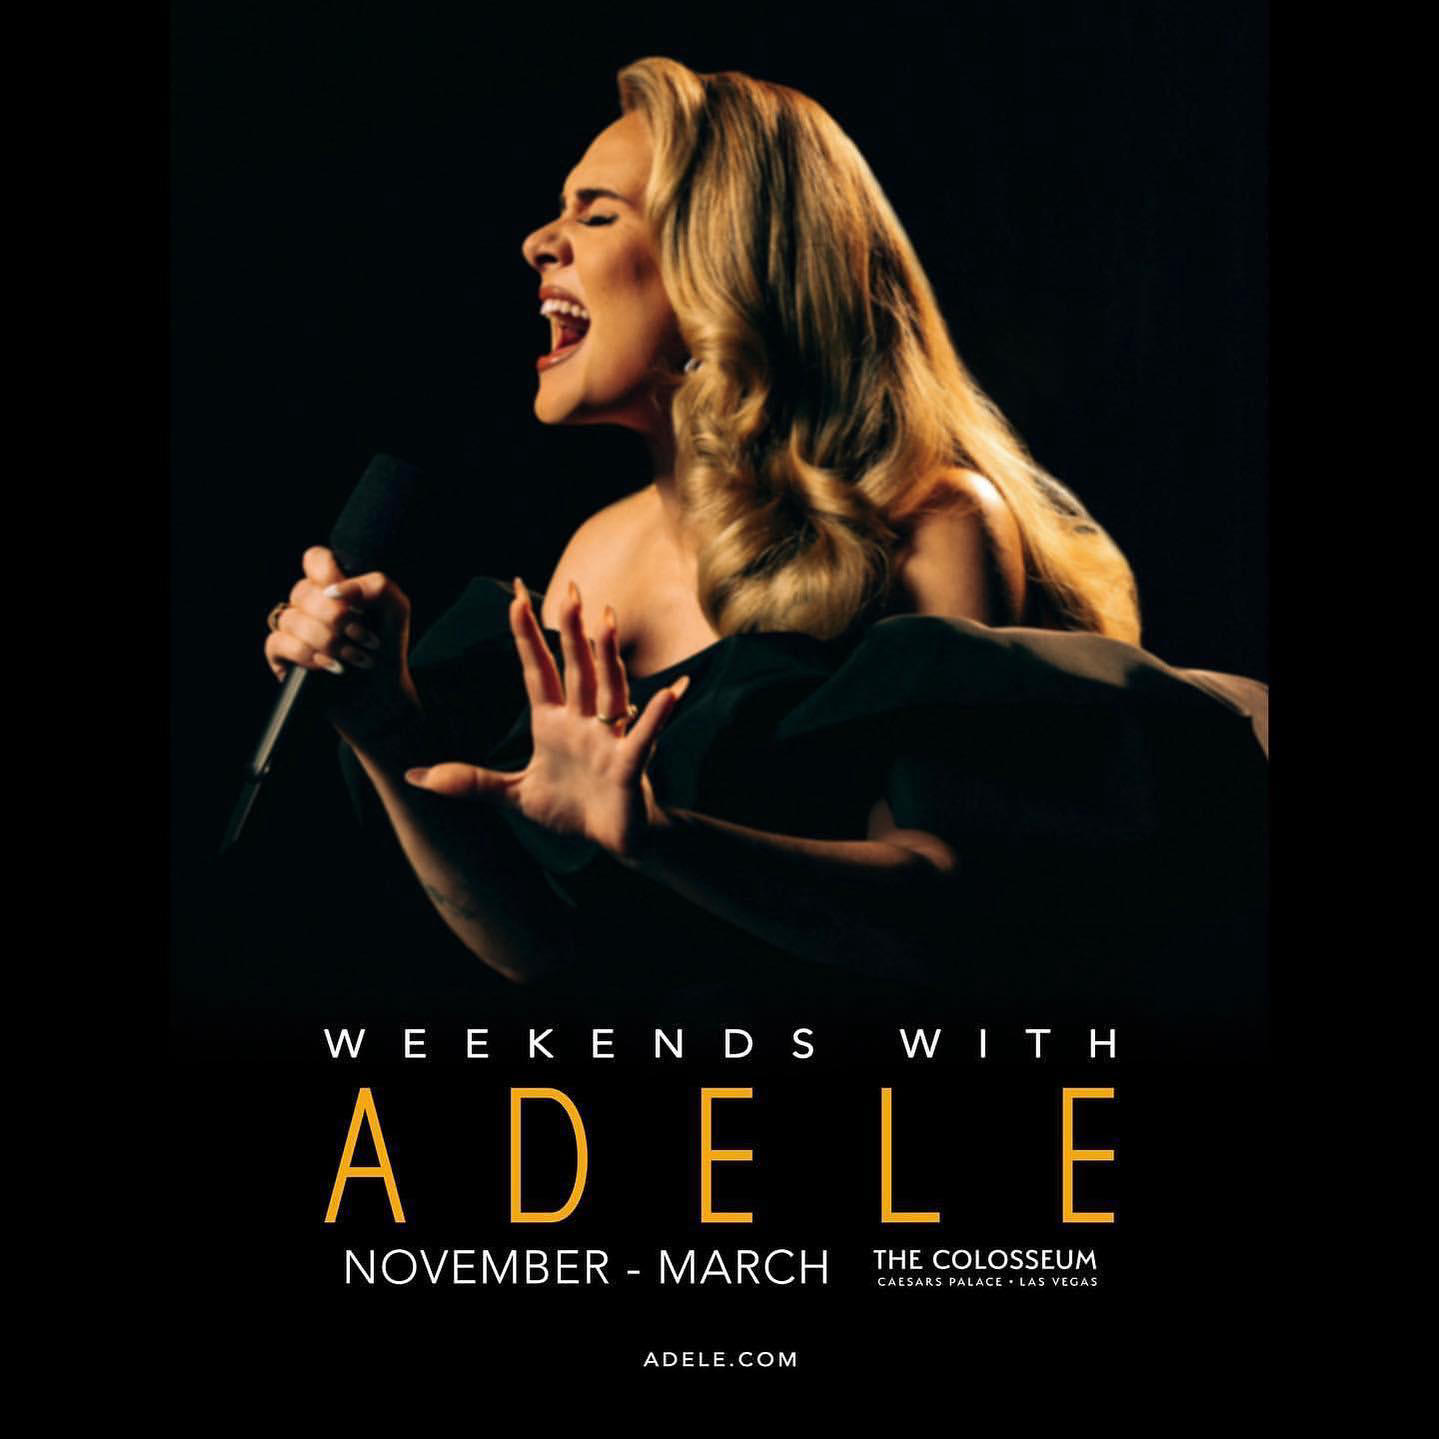 Caesars Palace - “Weekends with #Adele” the Las Vegas Residency LIVE at #colosseumatcp at Caesars Palace debuts this November through